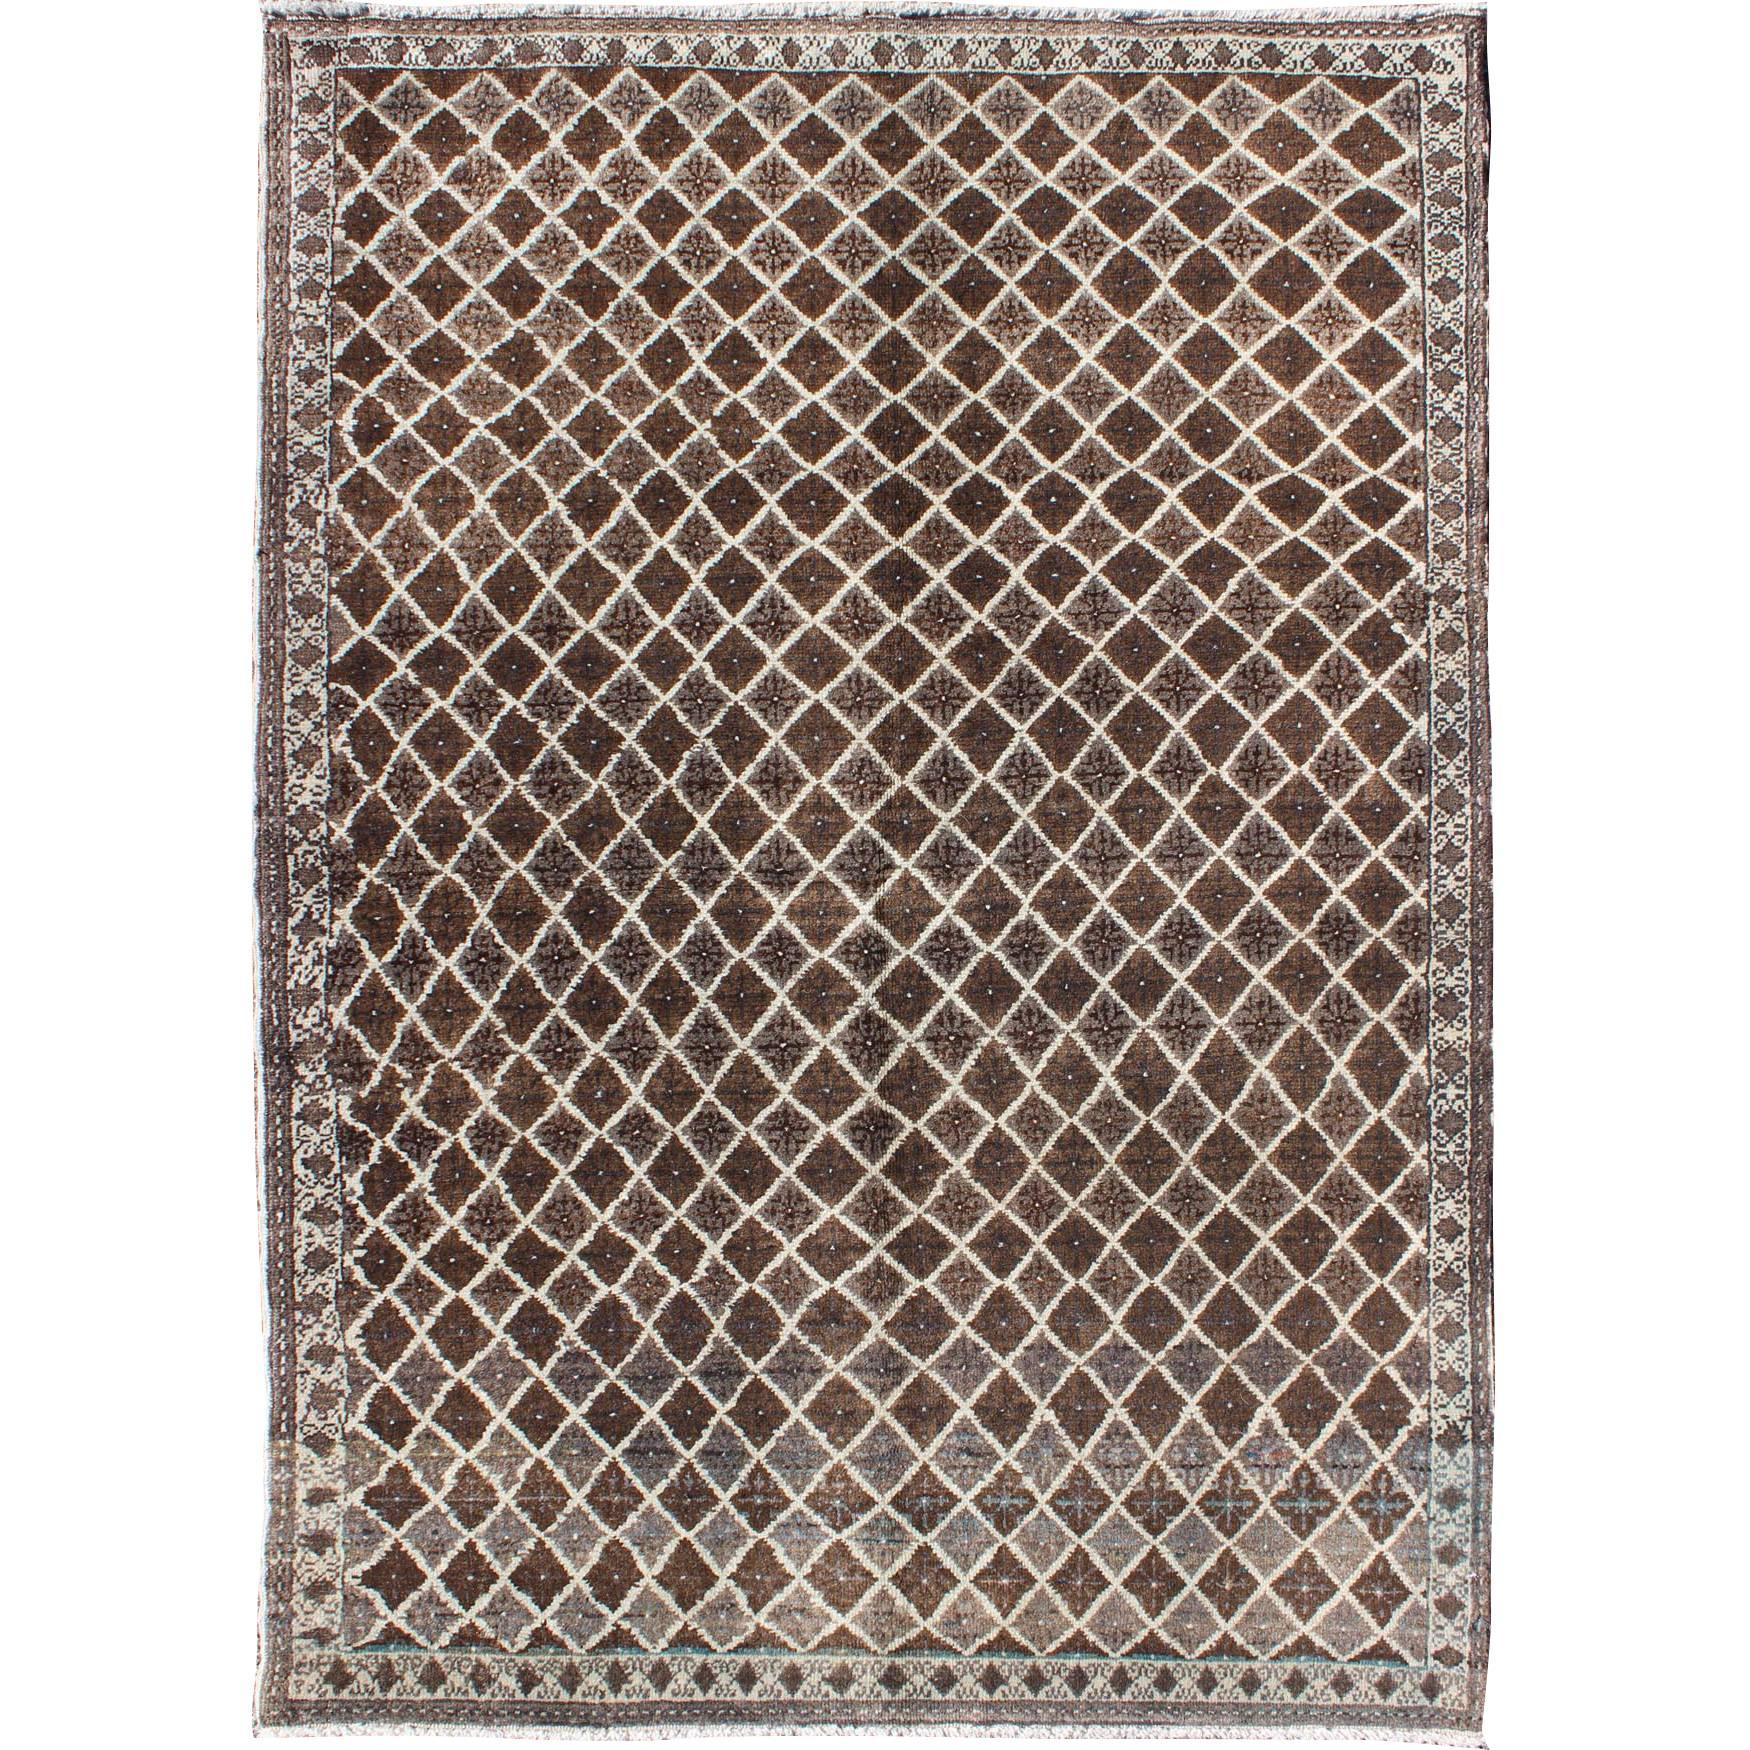 Turkish Rug with Modern Diamond Design in Brown Colors